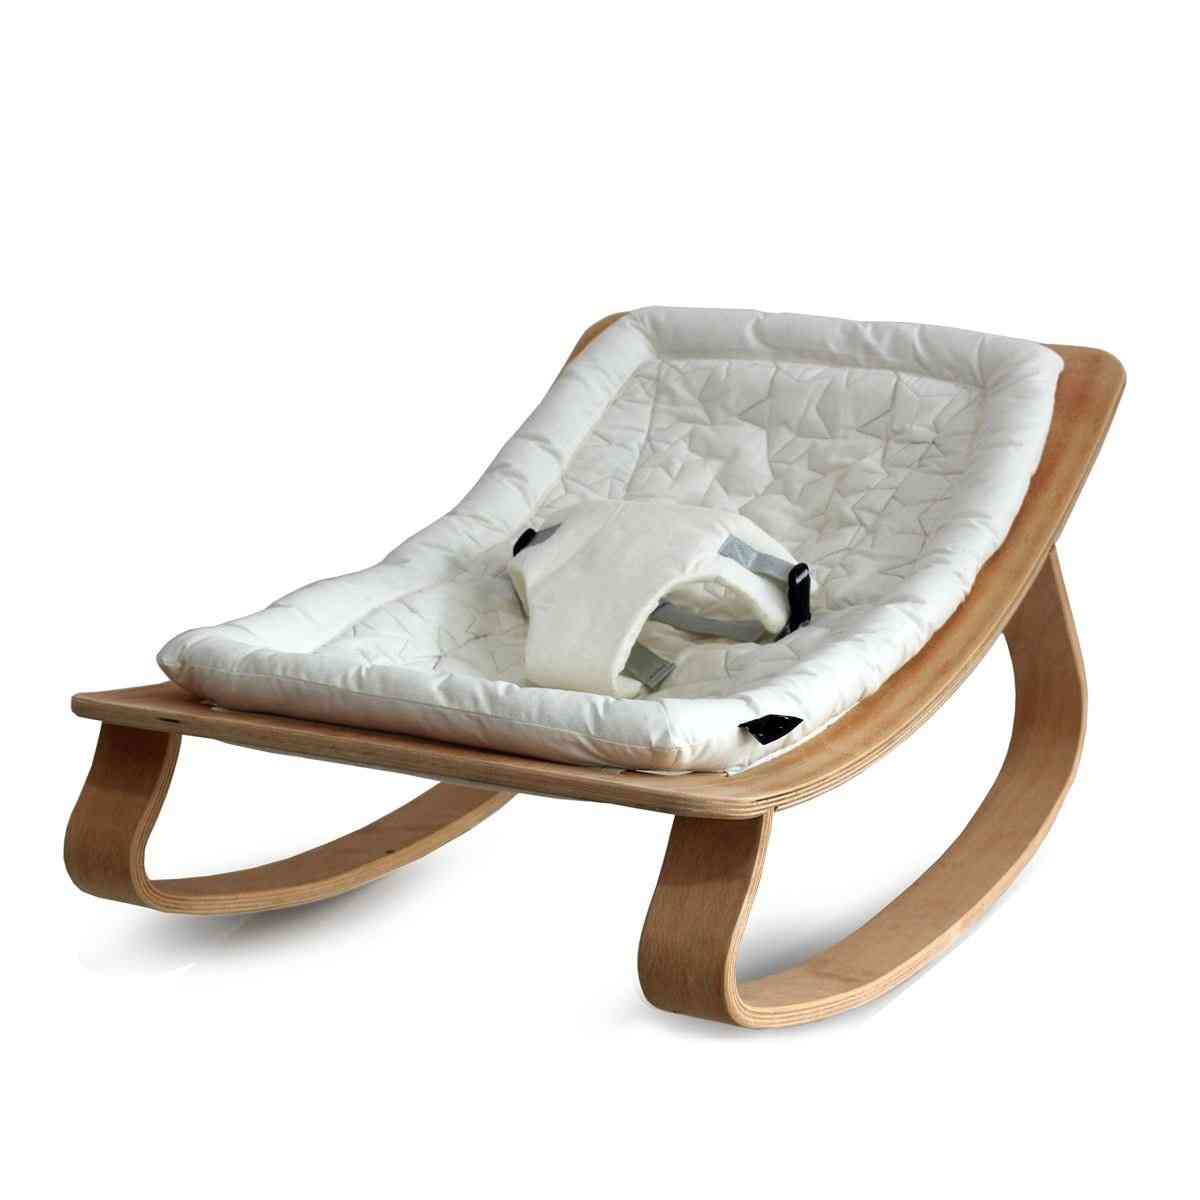 Portable Baby Crib Child Bed Rocking Chair Bassinet